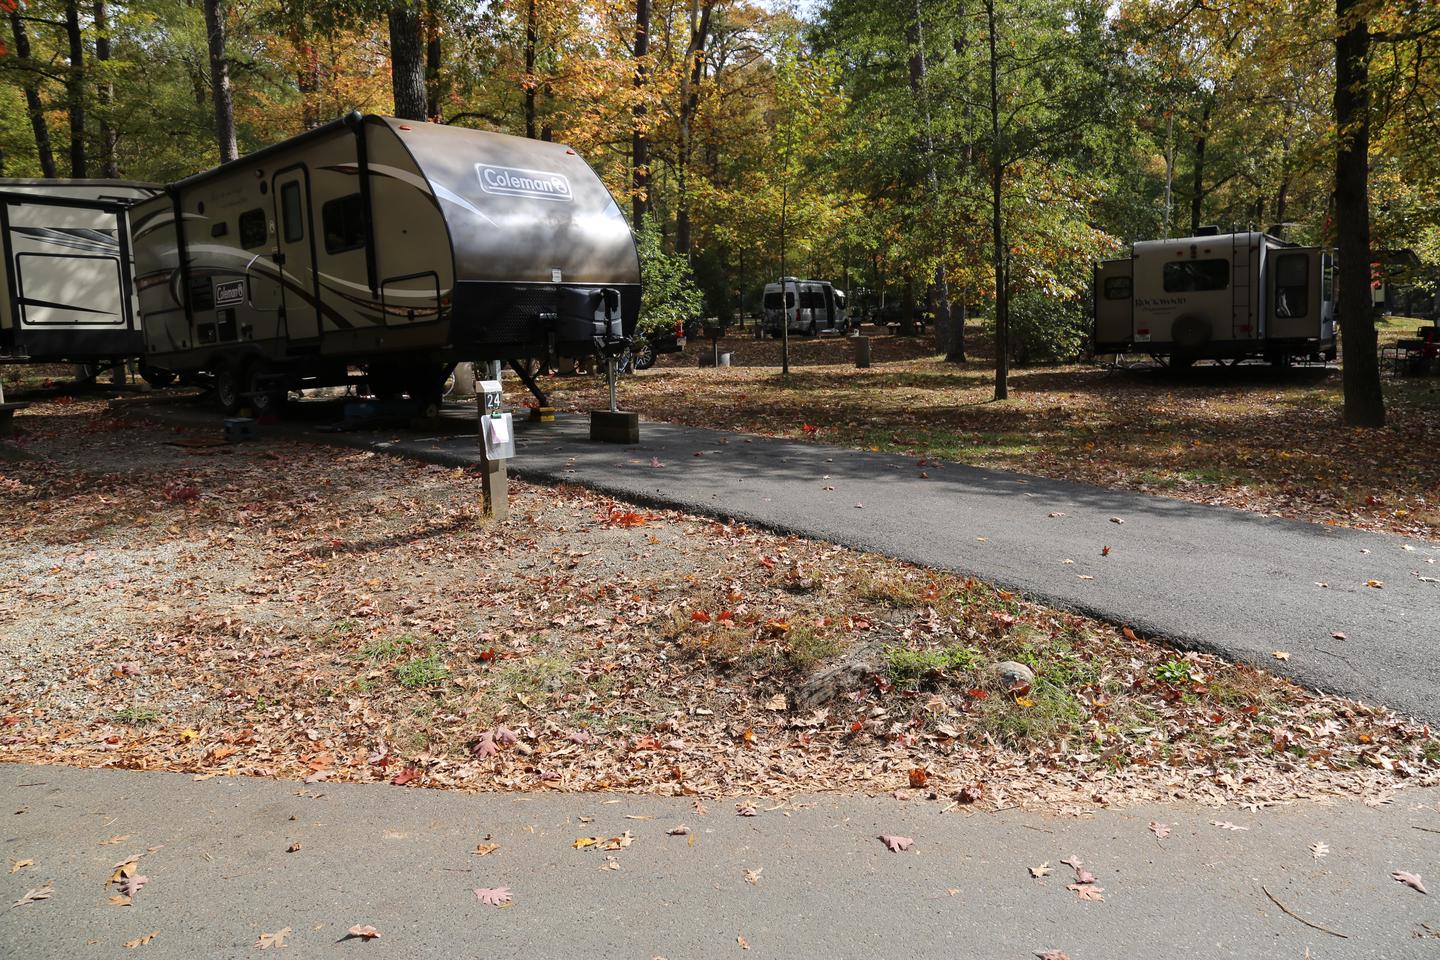 Camper on paved pad surrounded by trees and fallen leavesCampsite 24